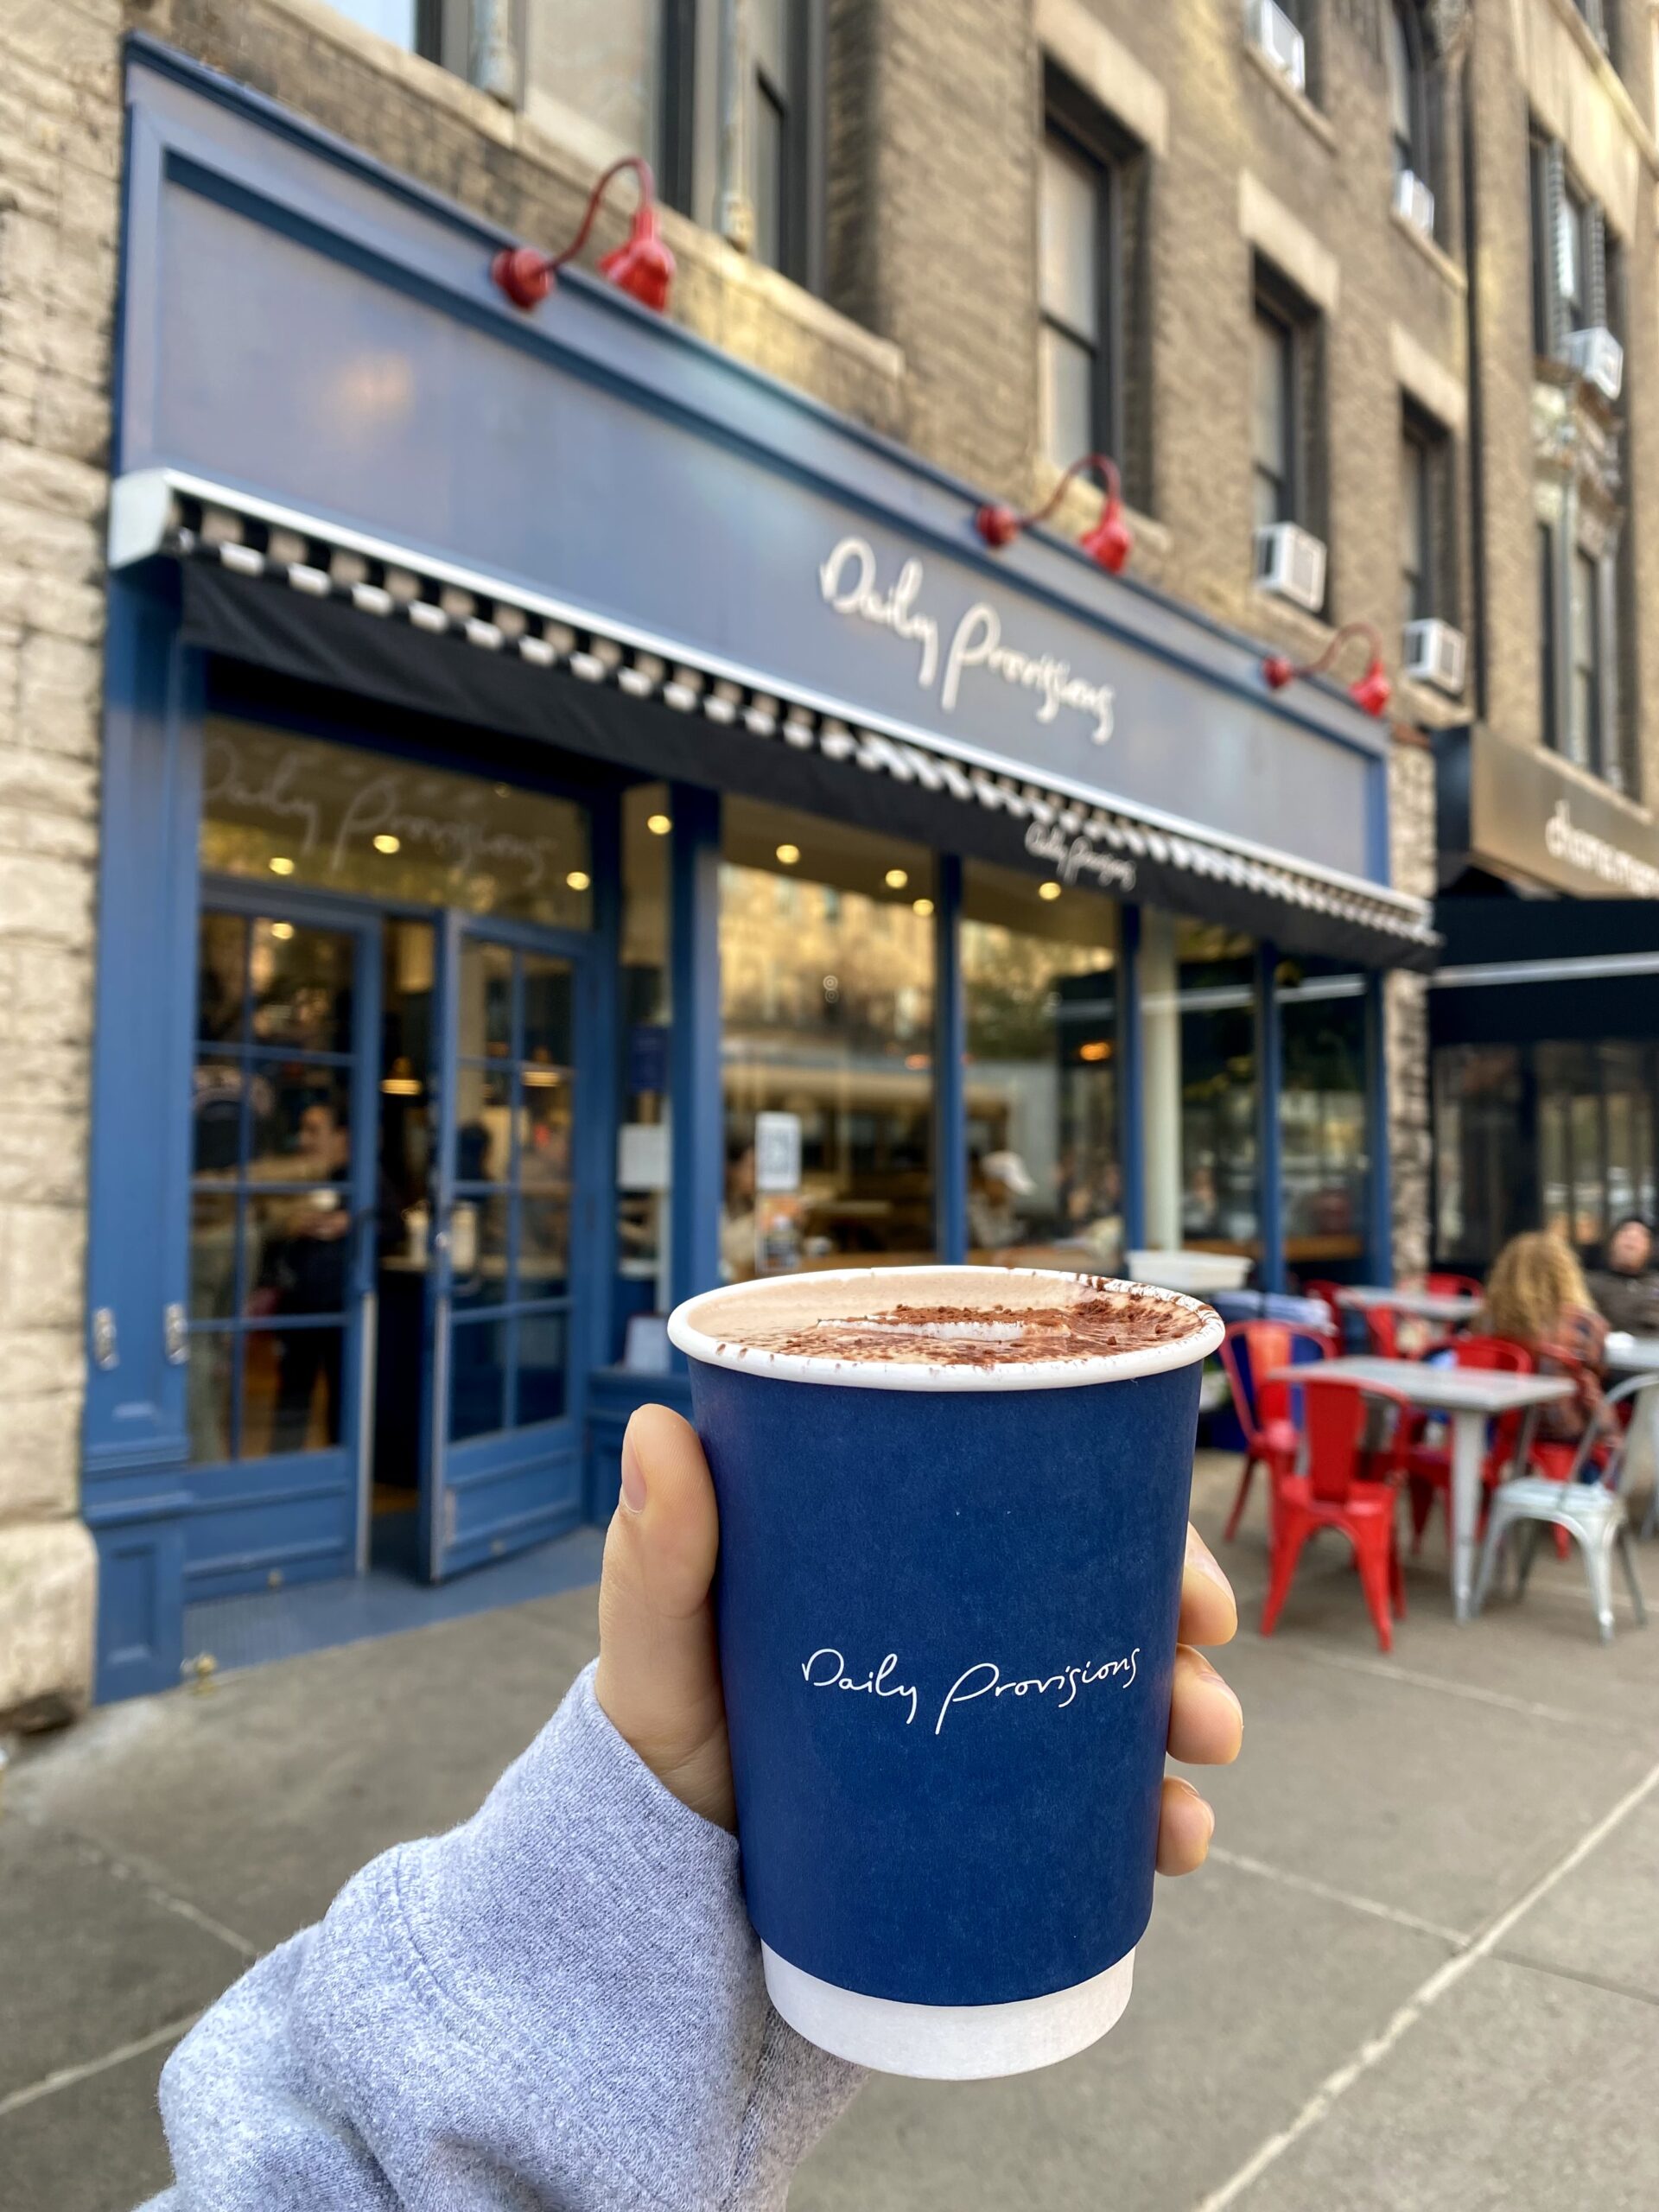 Daily Provisions Hot Chocolate 
Upper West Side